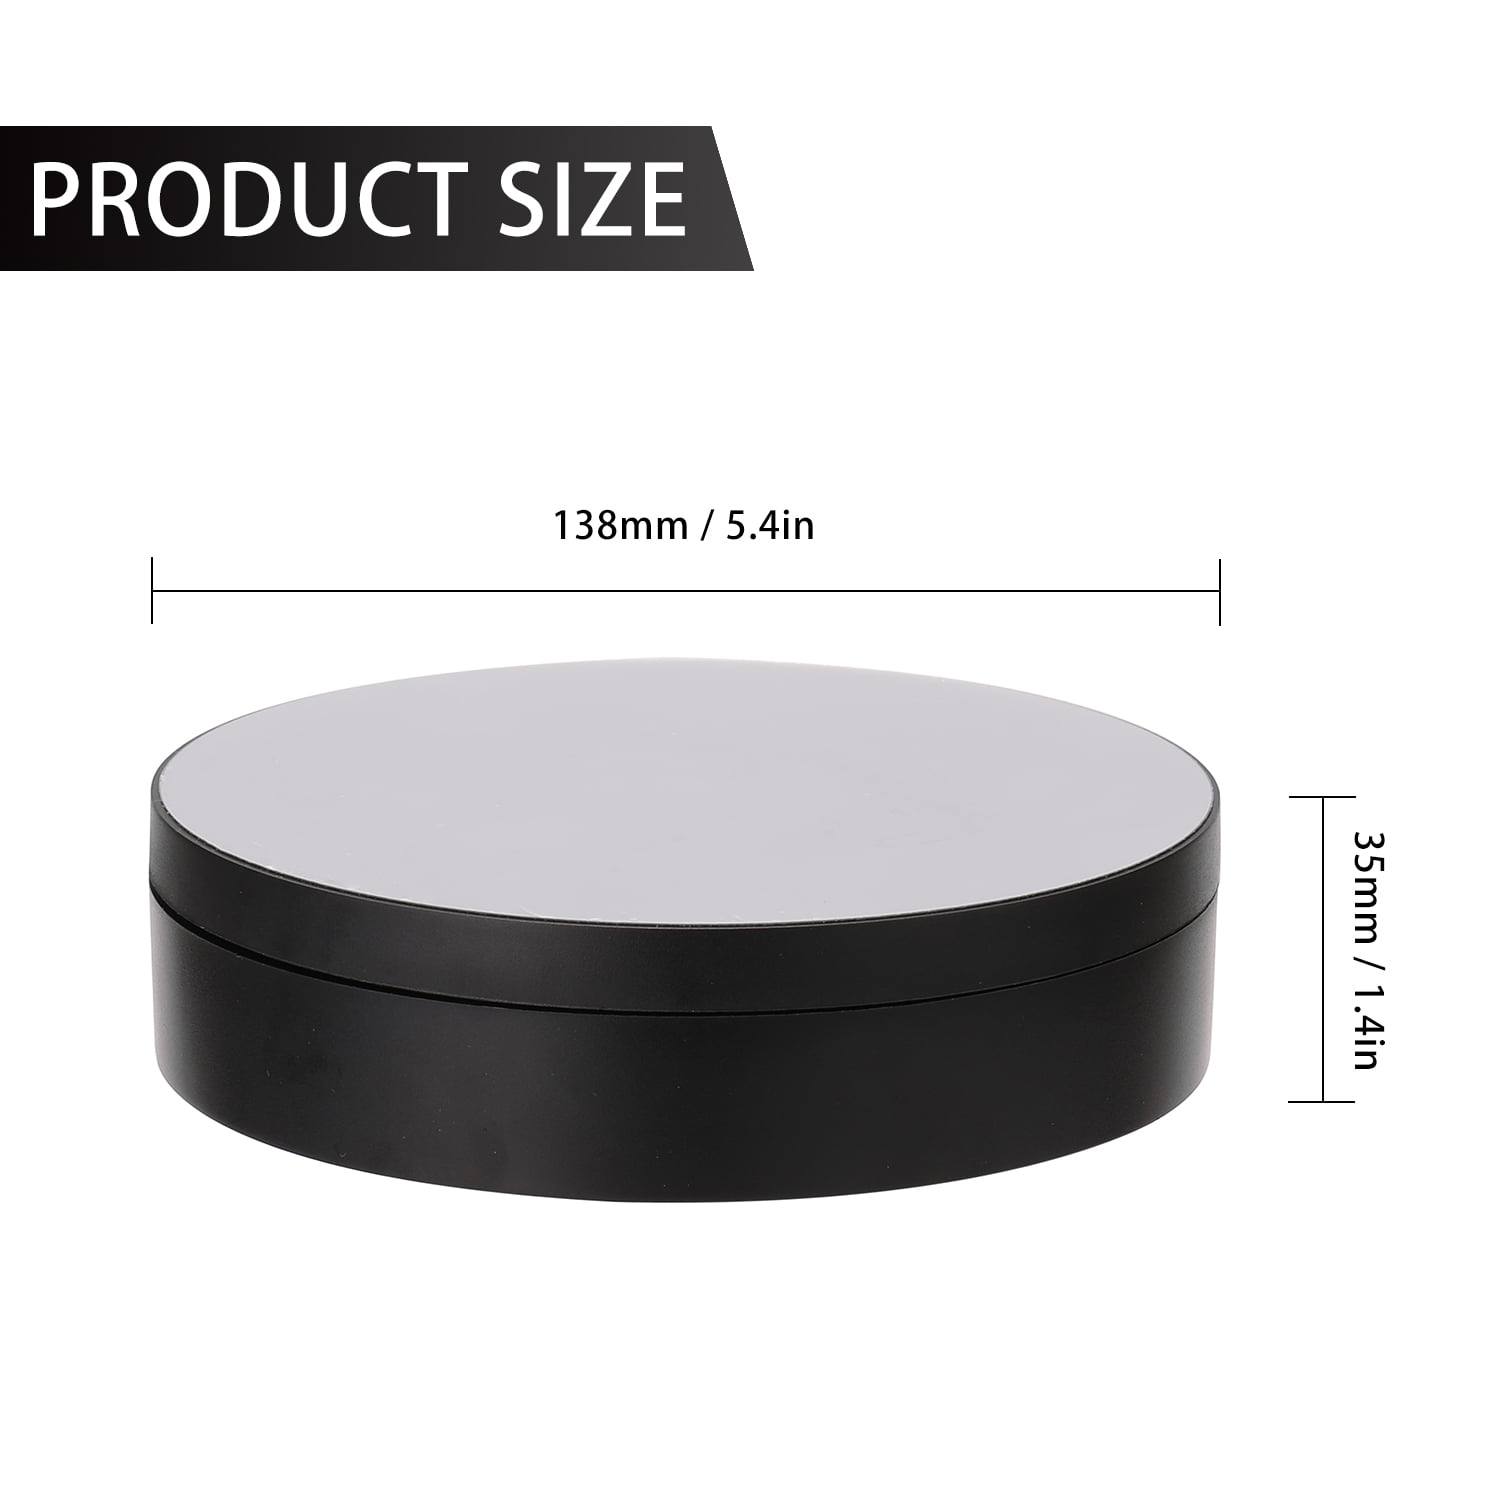 360° Rotating Turntable Display Stand for Product Jewelry Video Shooting R6S4 